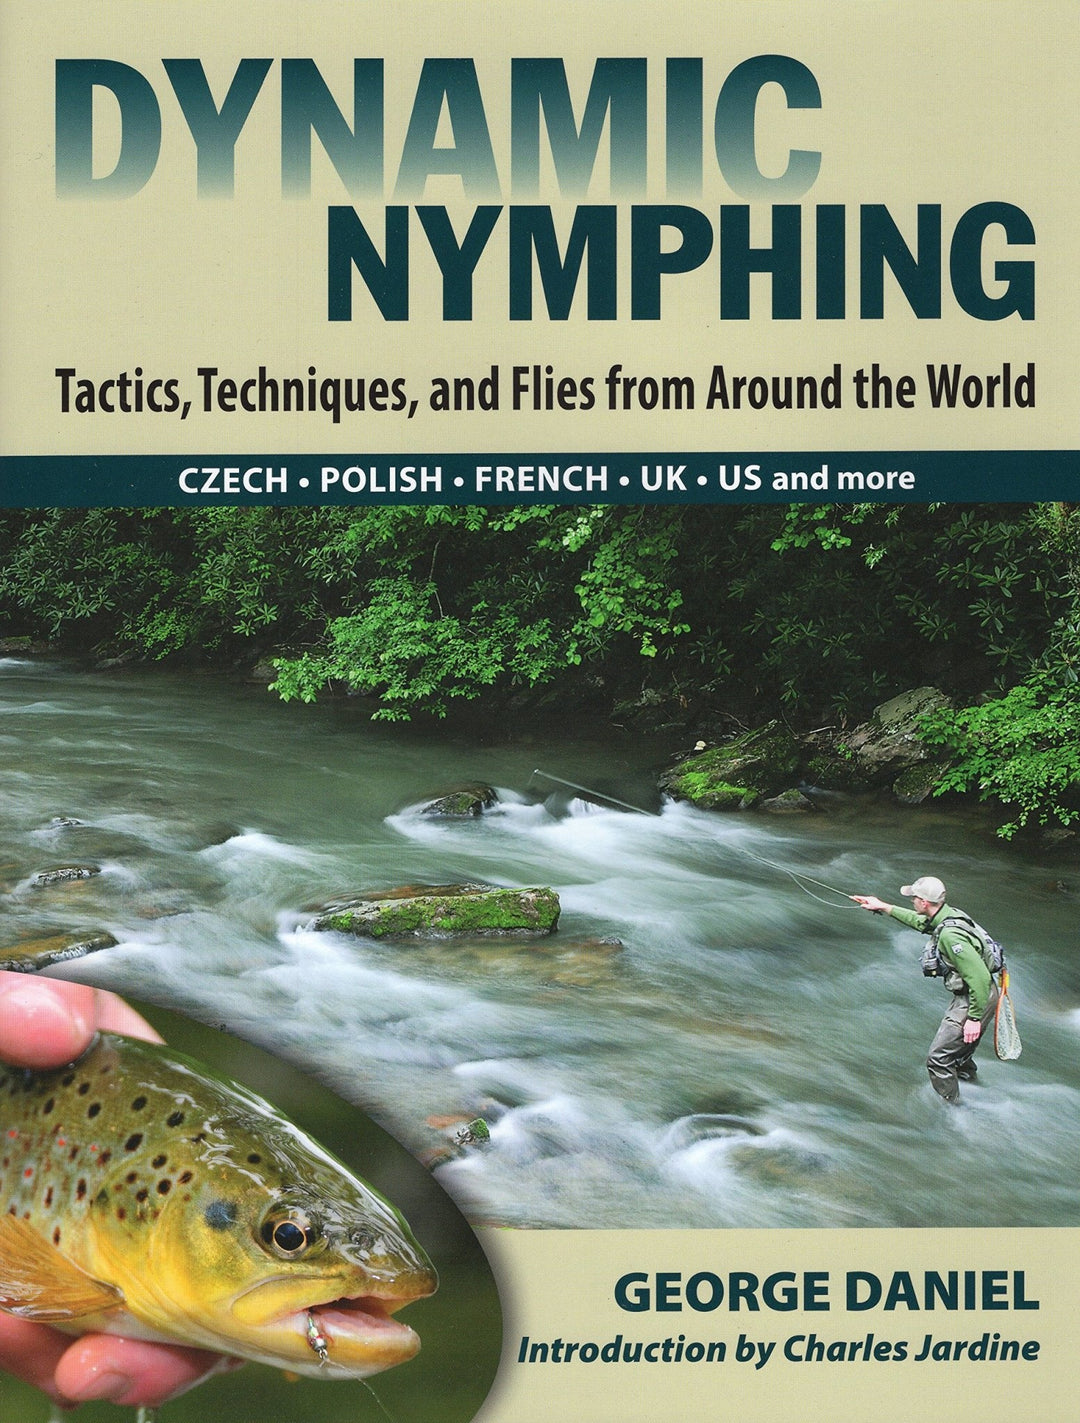 alt="Dynamic Nymphing Book by George Daniel - Tactics, Techniques, and Flies"